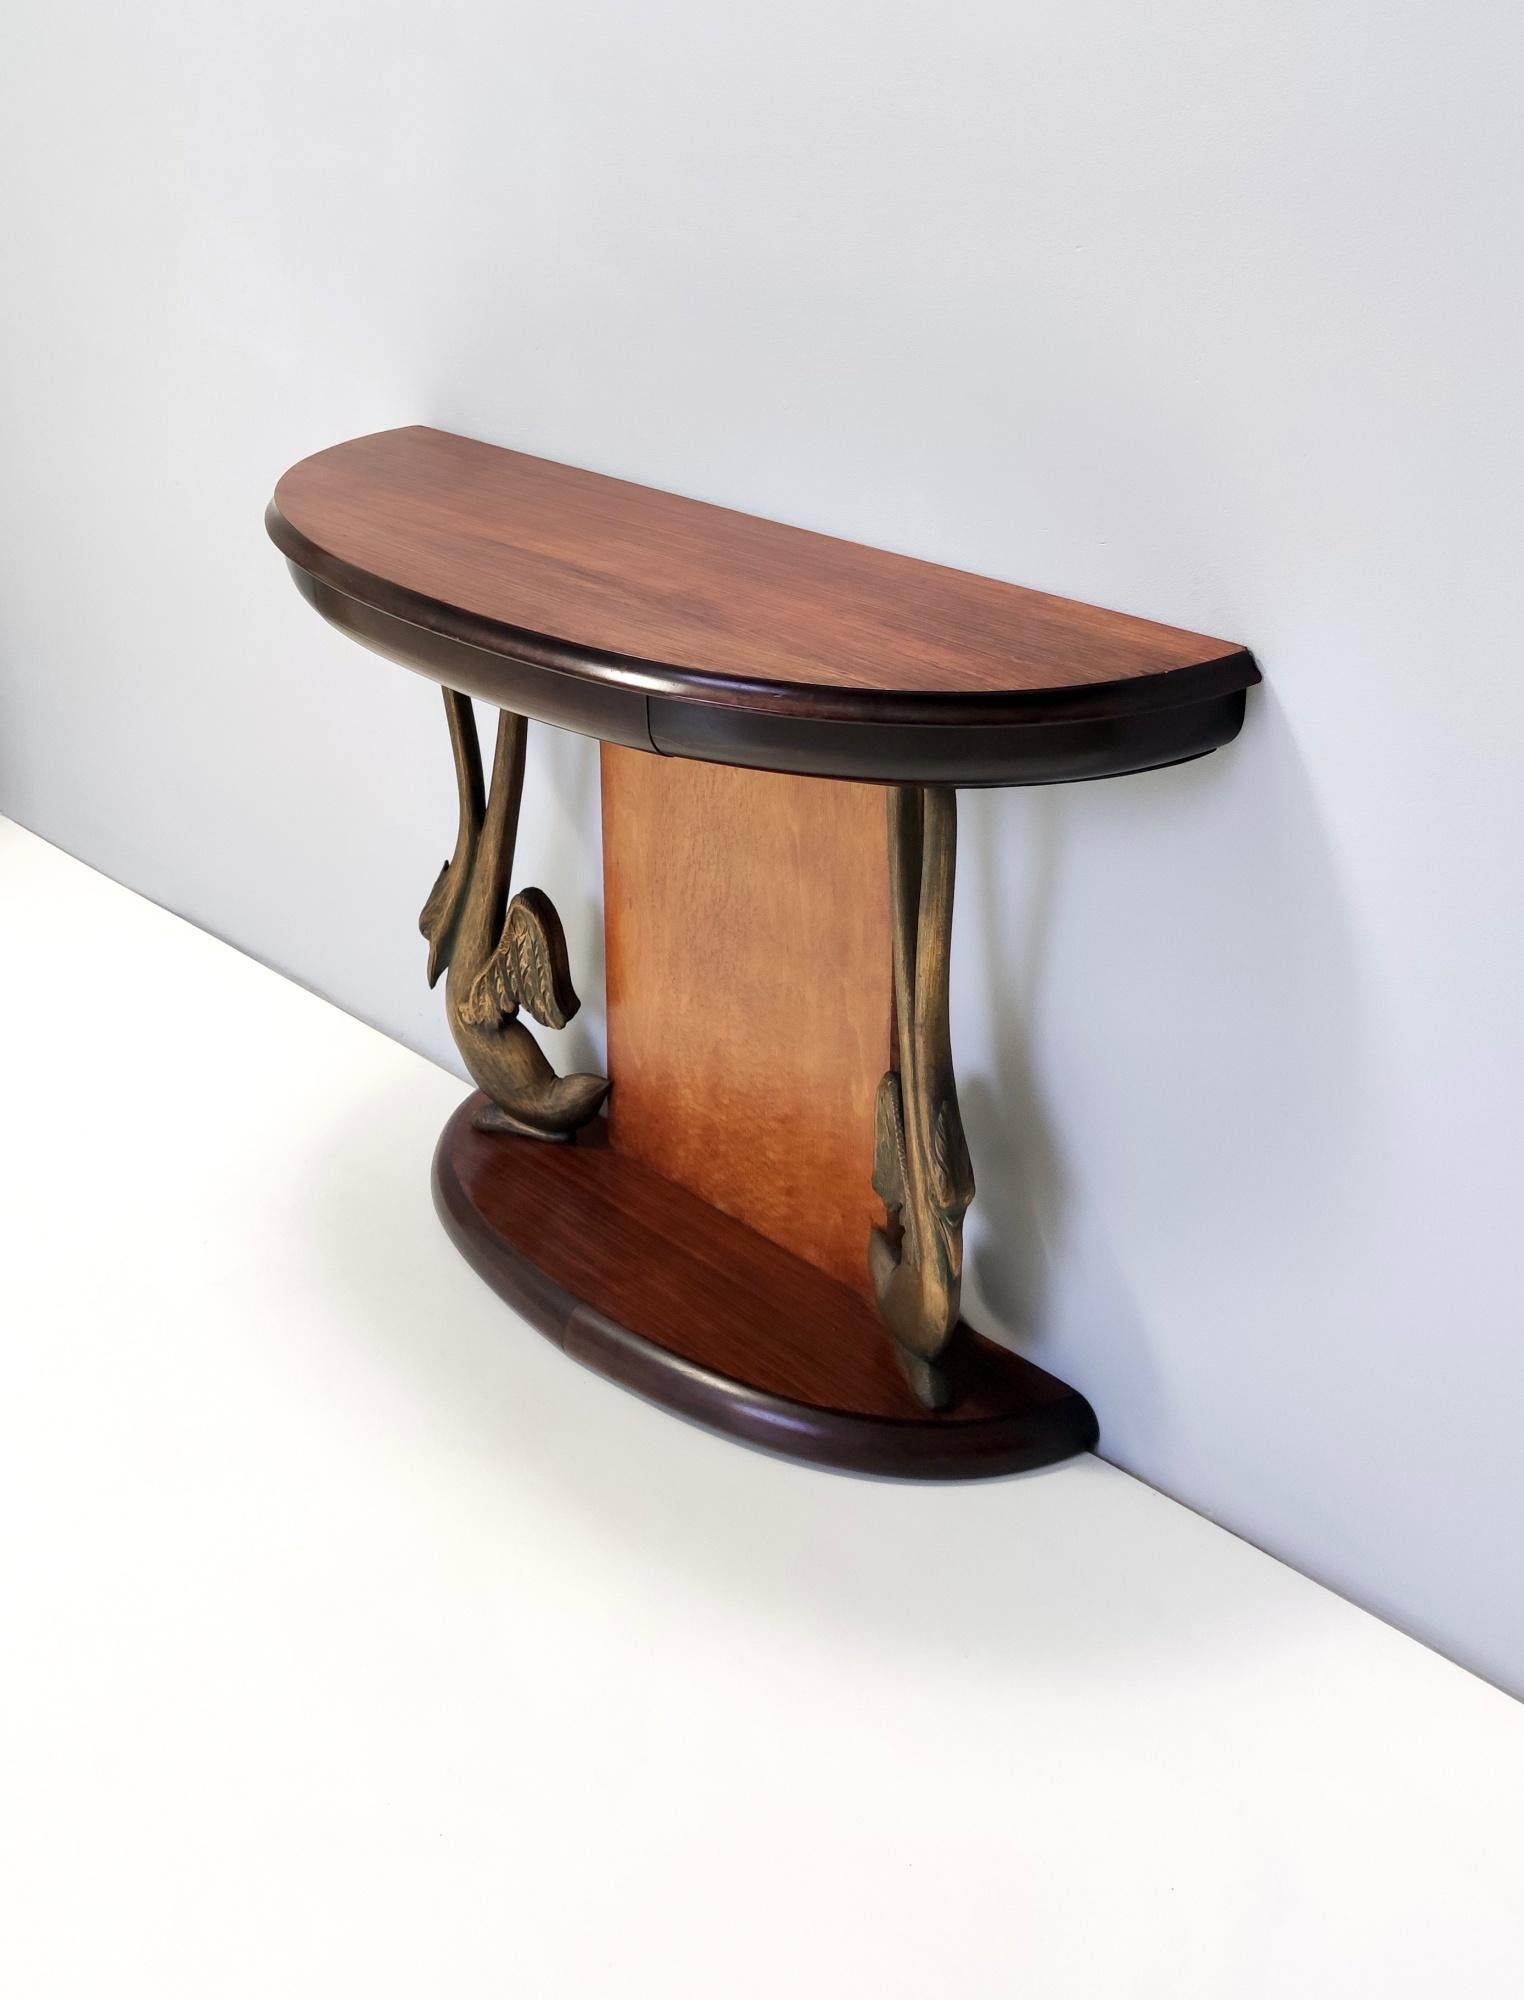 Italian Vintage Sculptural Swan Motif Canaletto Walnut Console Table by Dassi, Italy